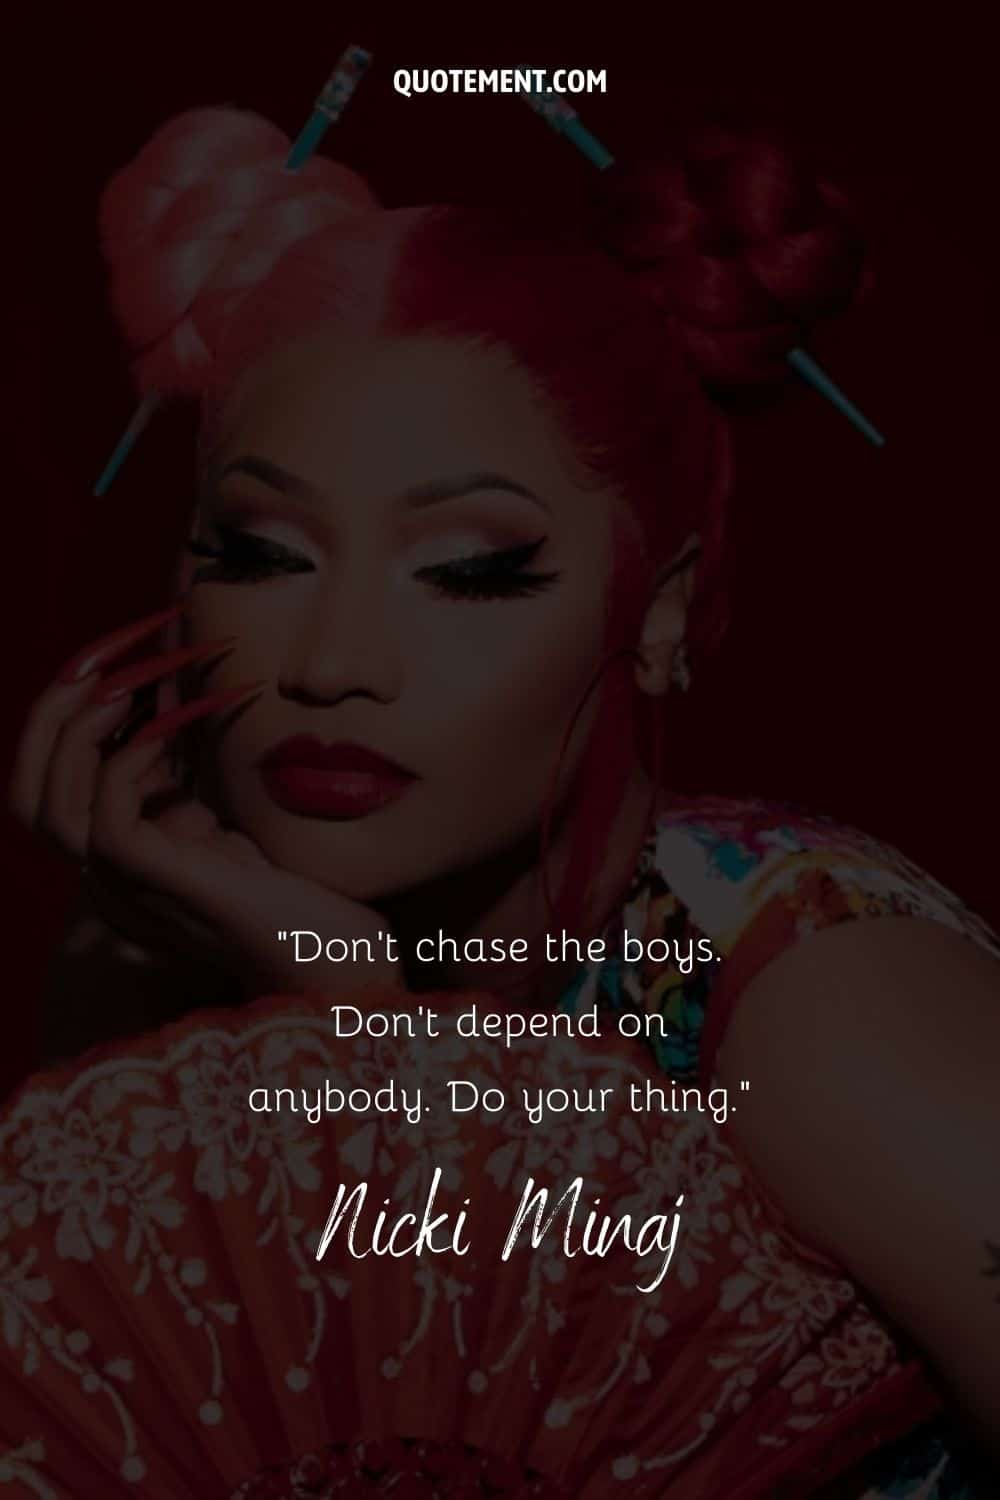 Motivational quote by the female rapper Nicki Minaj and her photo in the background